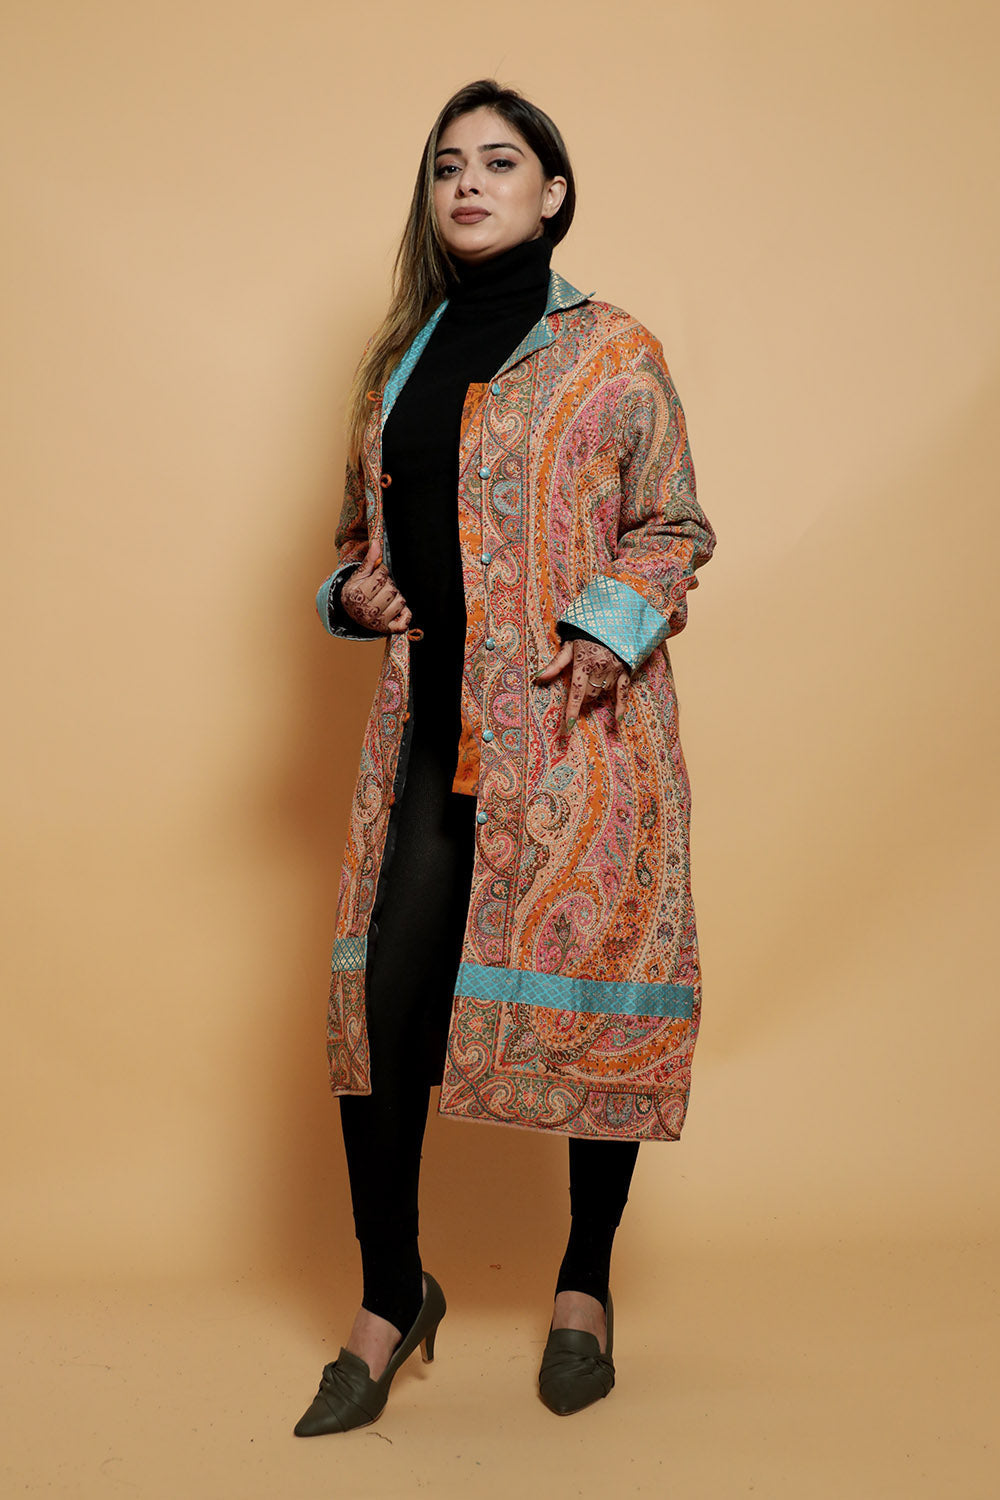 Sea Green Colour Kani Designer Jacket Along With New Jaal